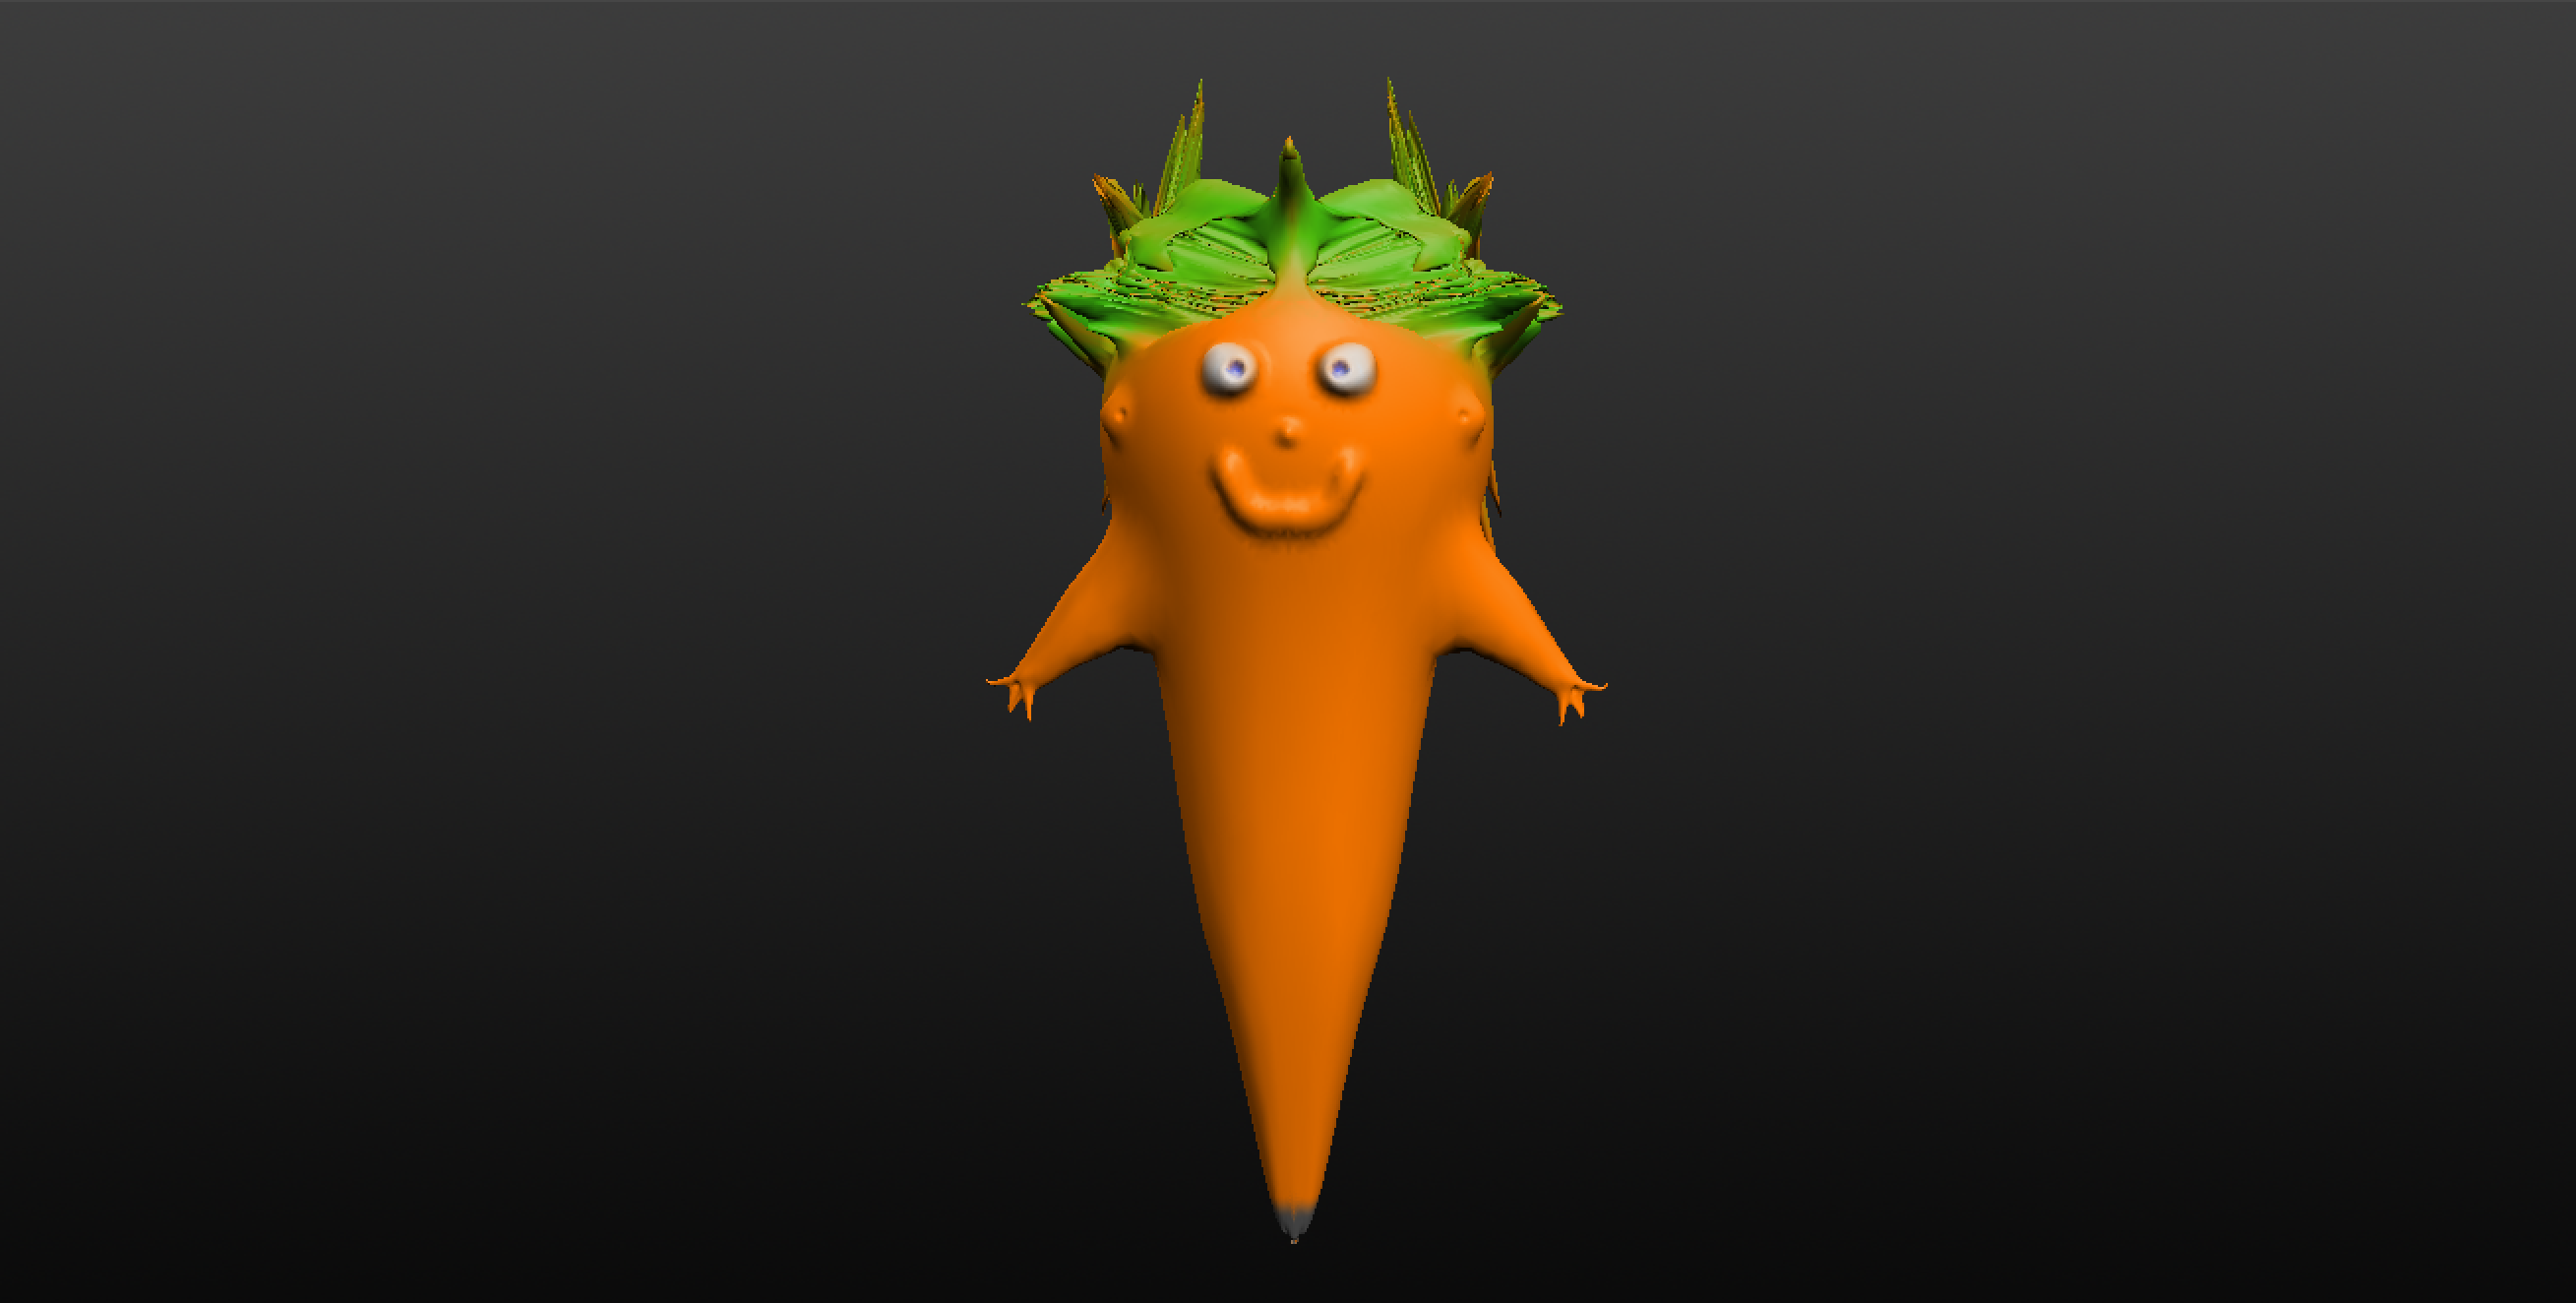 Bob The Carrot, Isolde, age 8